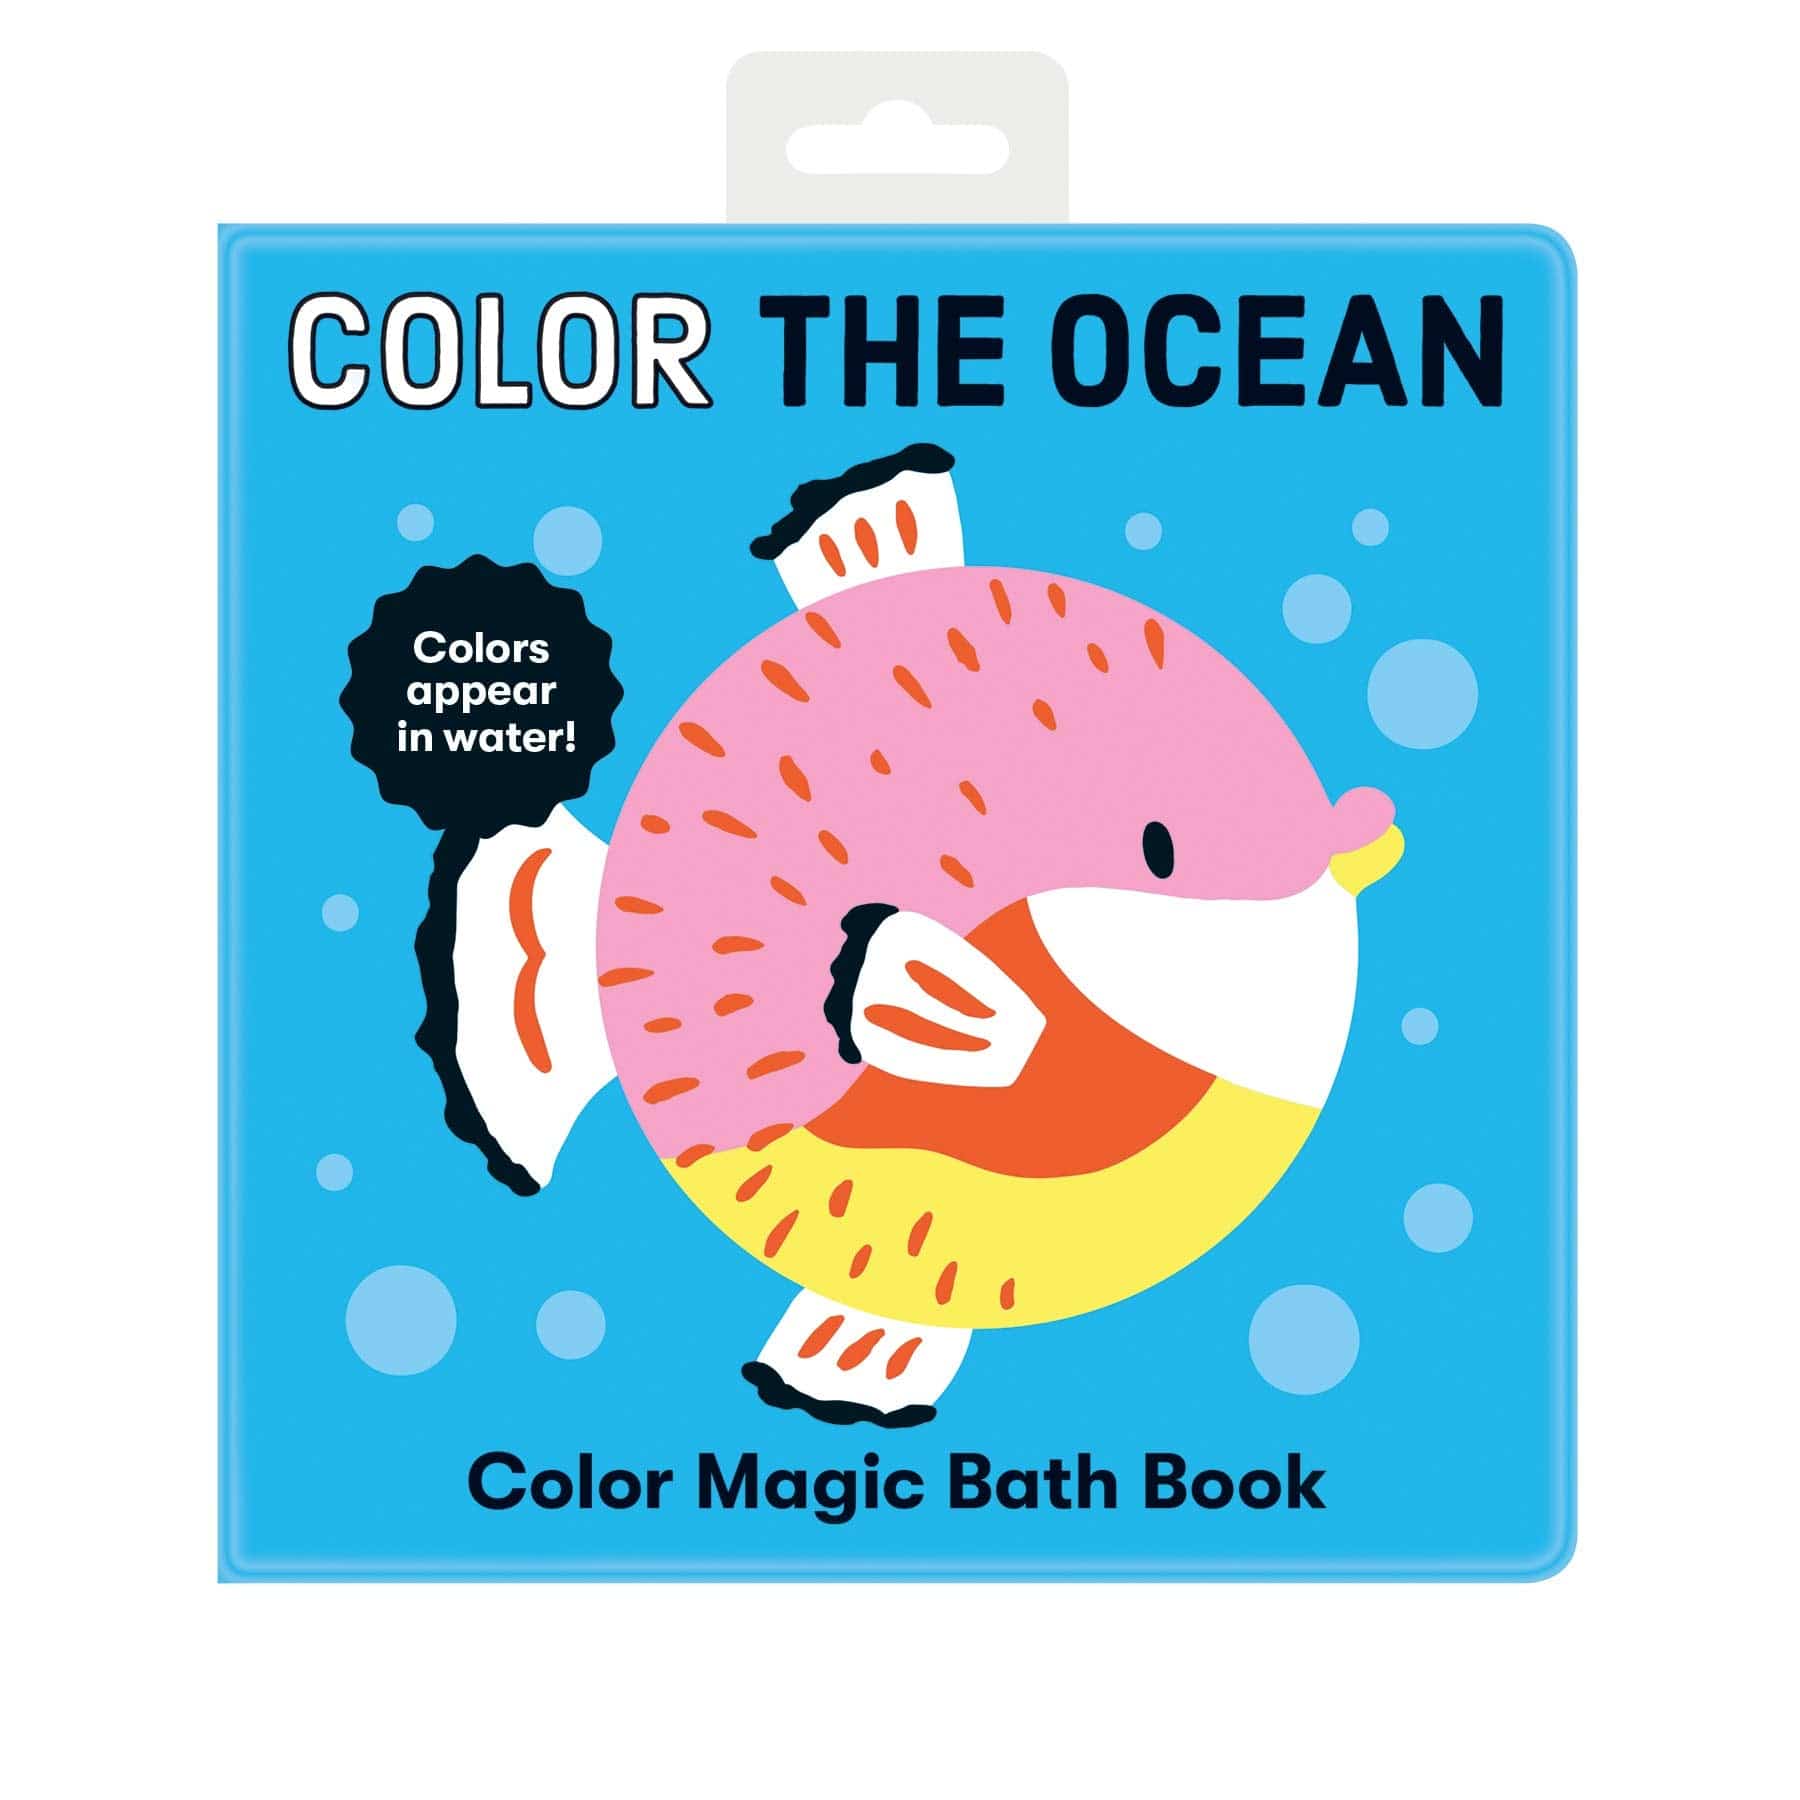 Color the Ocean Color Magic Bath Book - Twinkle Twinkle Little One